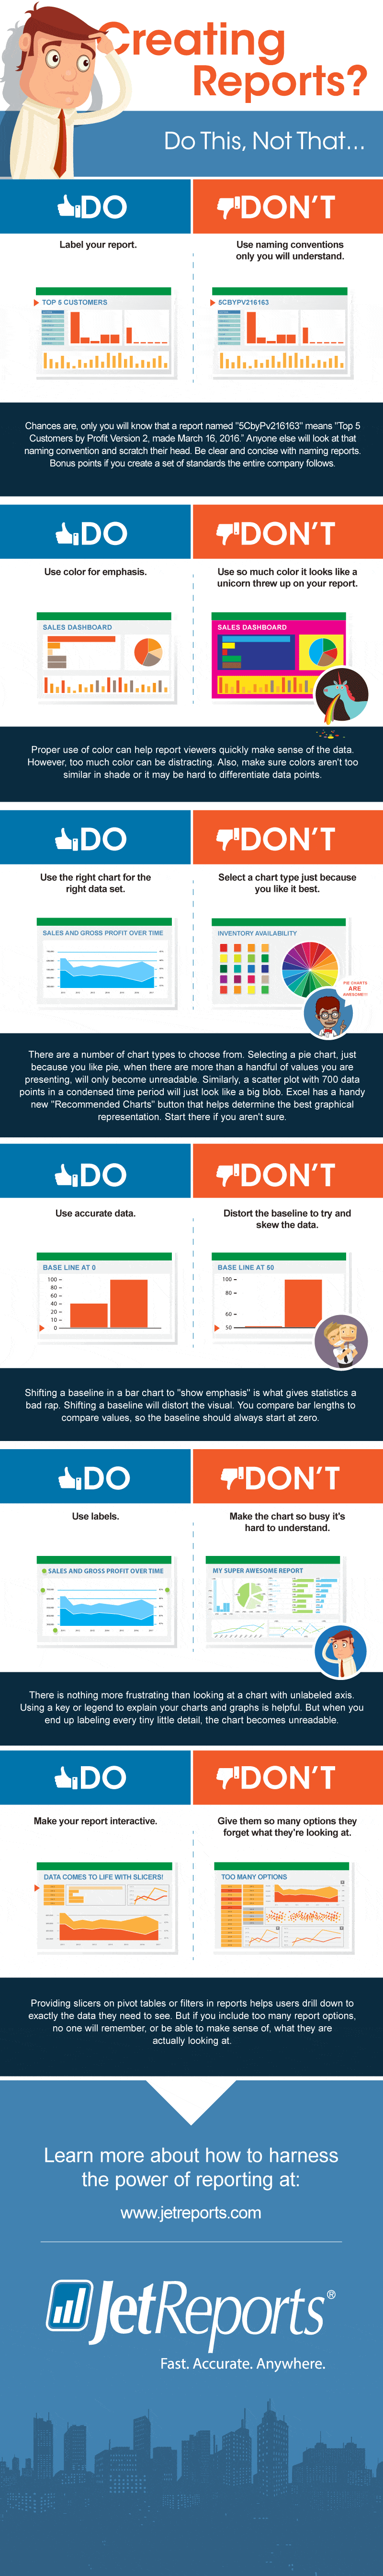 do-and-dont infographic